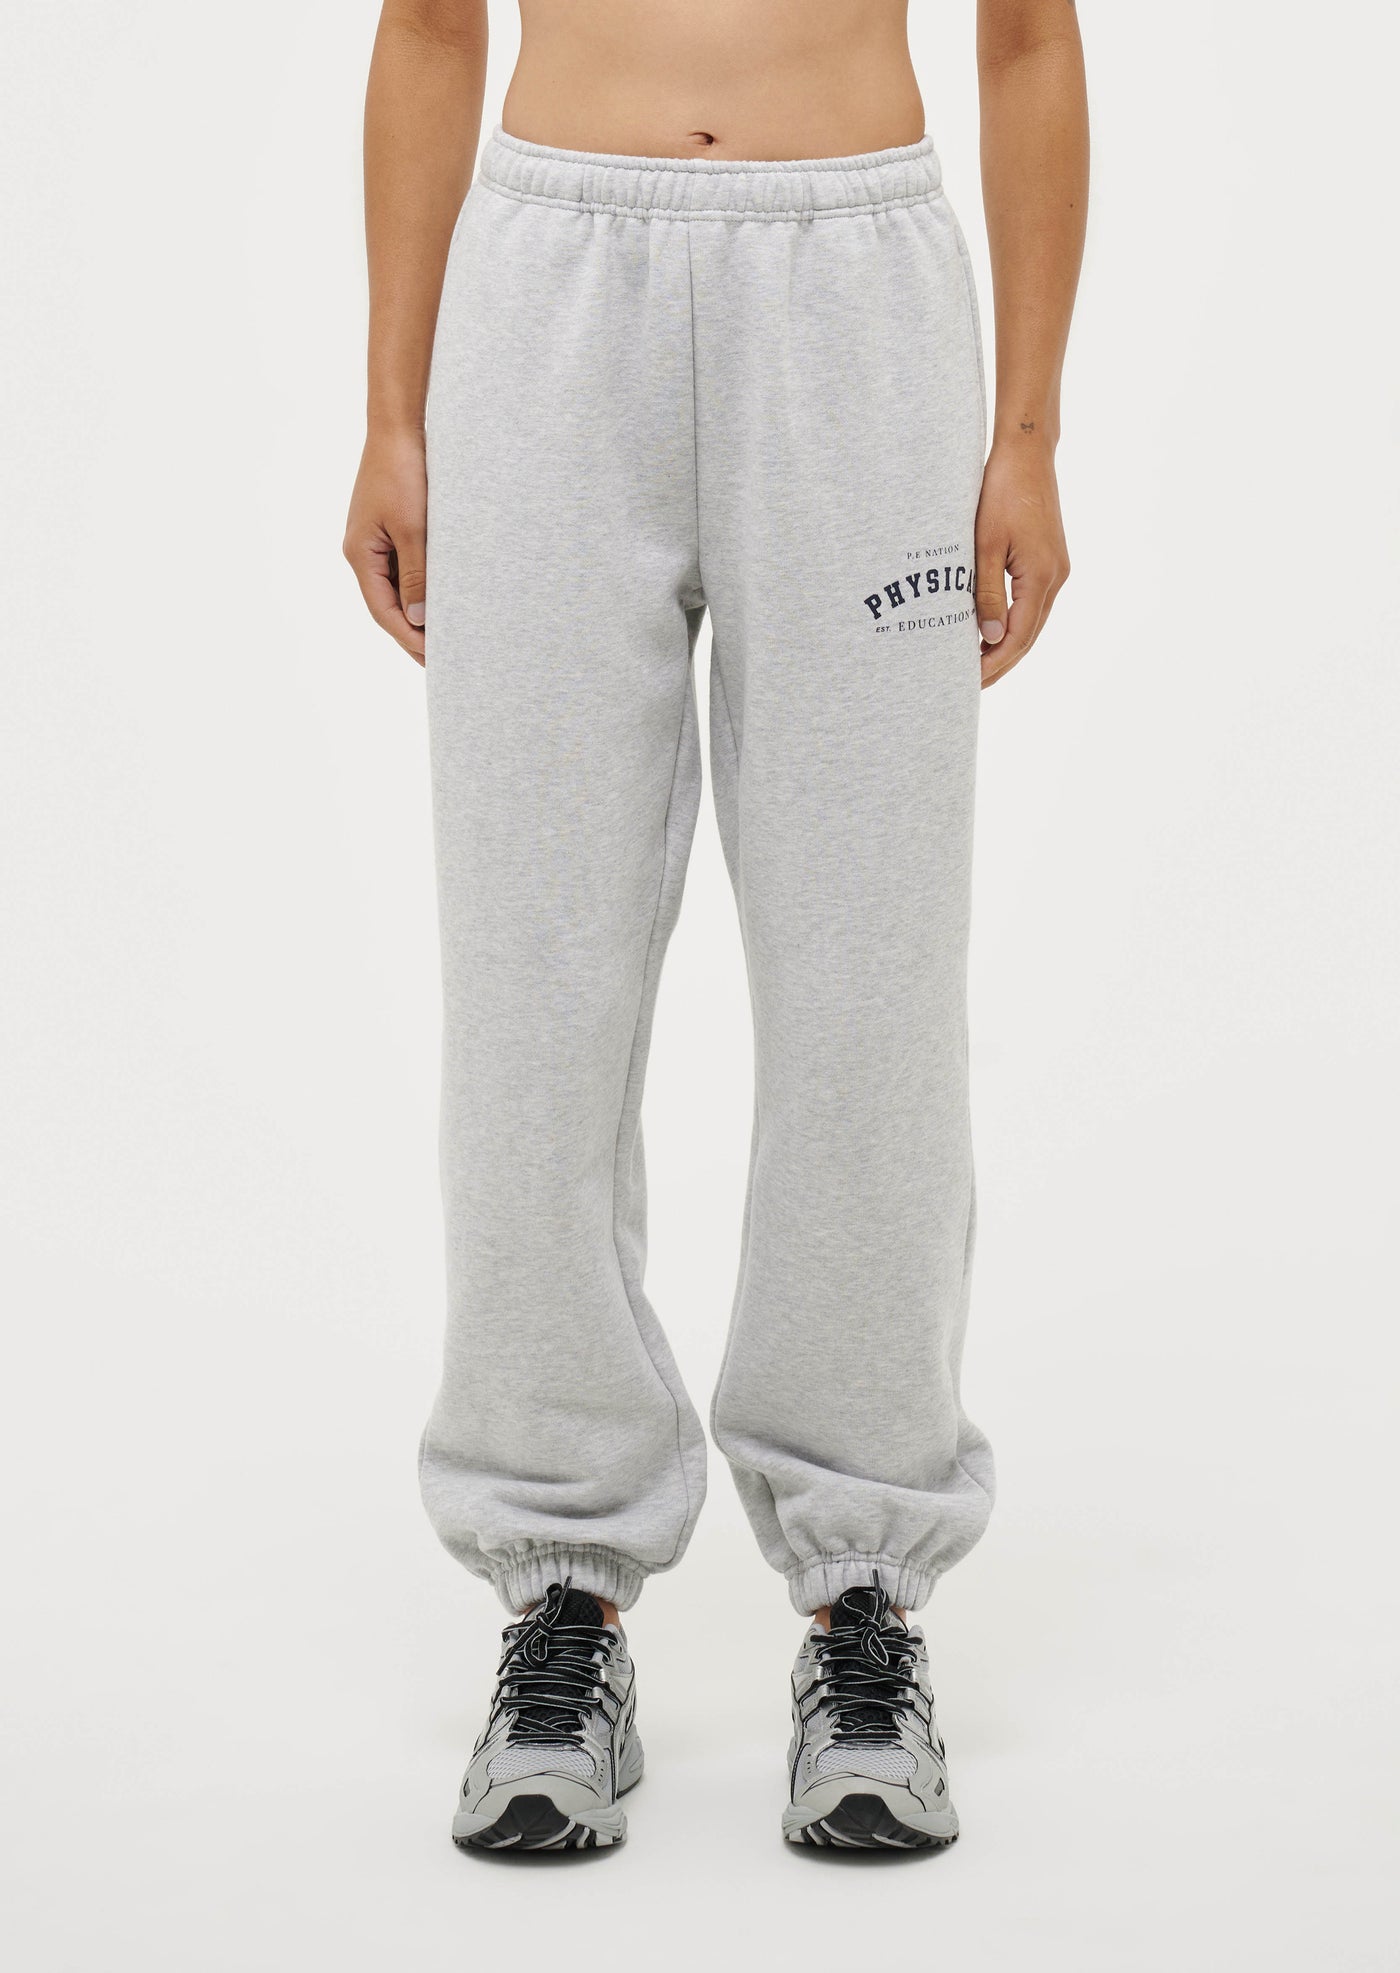 PHYSICAL TRACKPANT IN GREY MARL